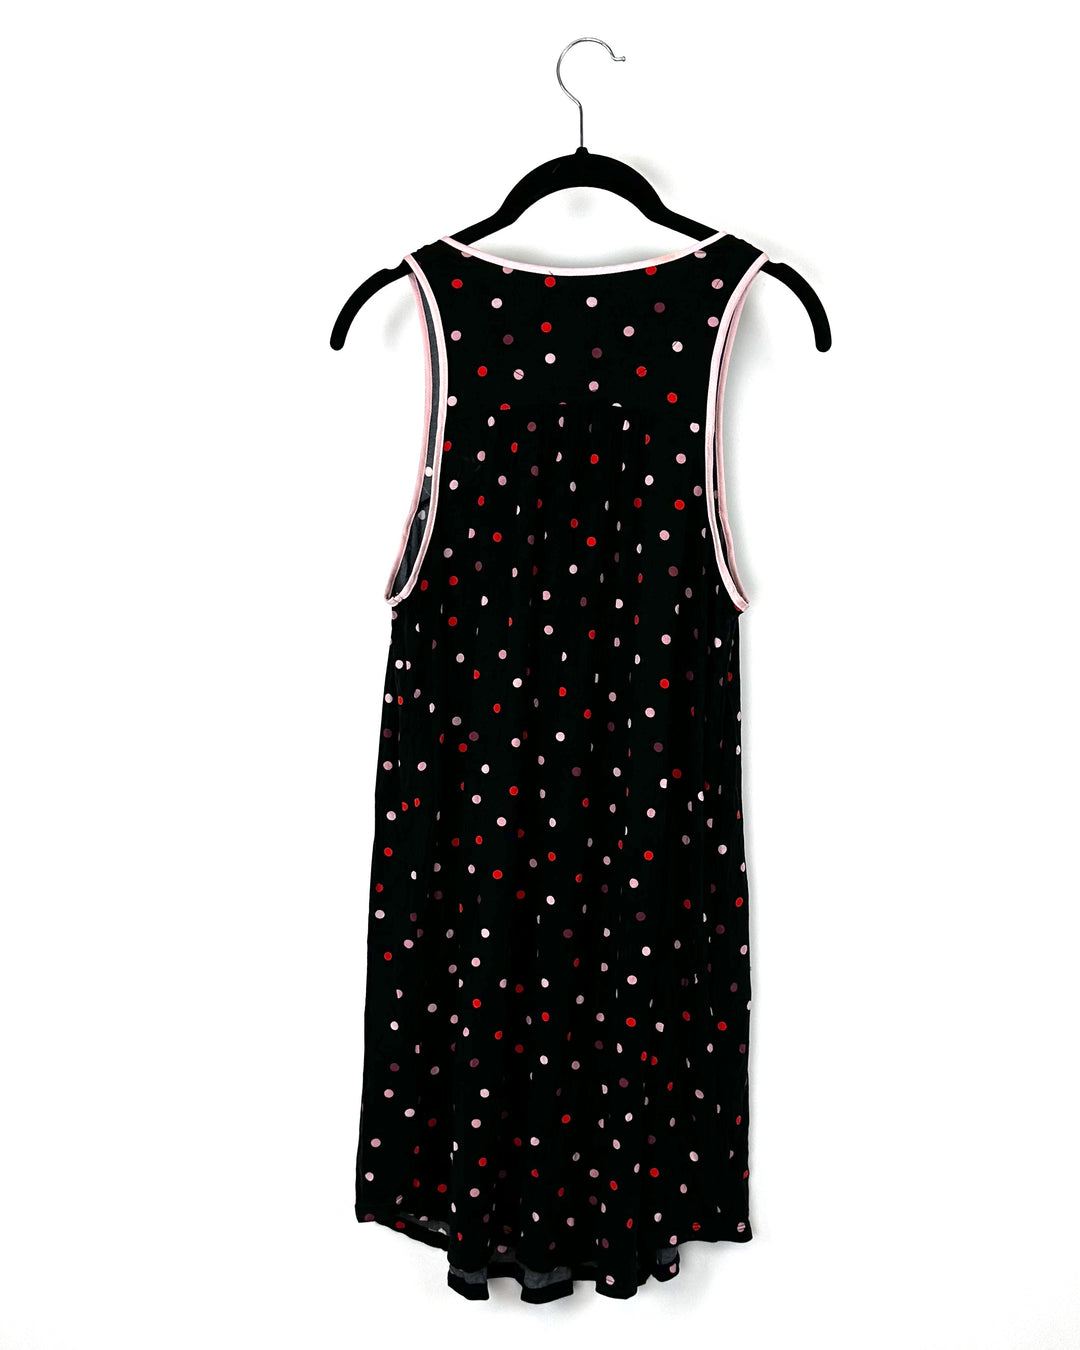 Black and Pink Polka Dot Nightgown - Size 4-6